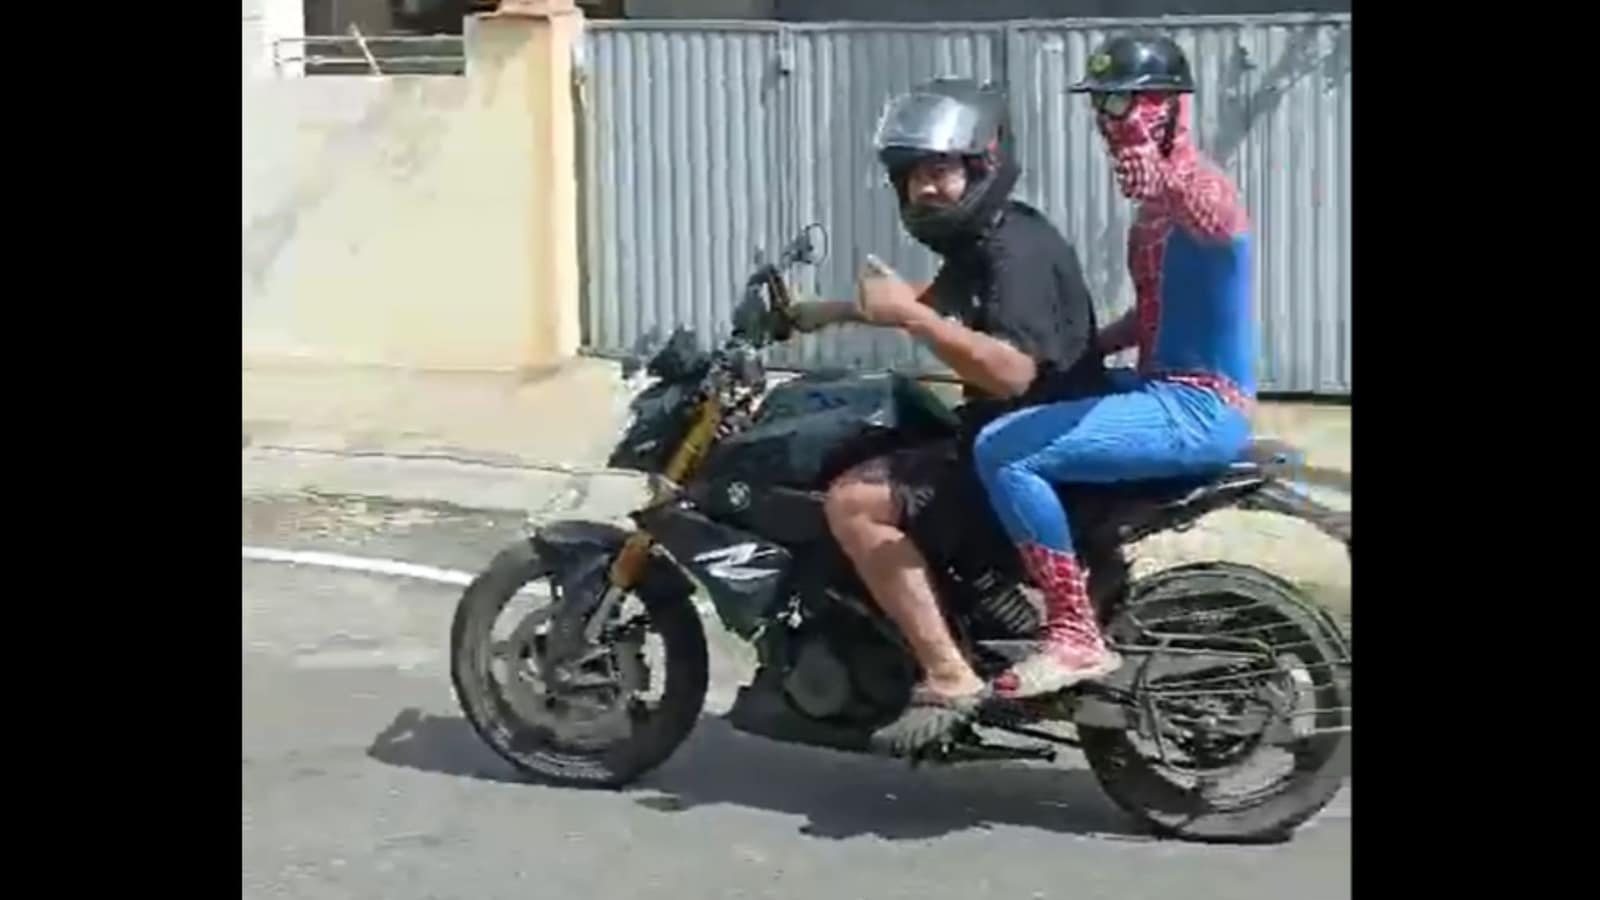 Spider-Man in JP Nagar? Video of man riding pillion in Bengaluru goes viral. X users say ‘Spider-Man: Homecoming’